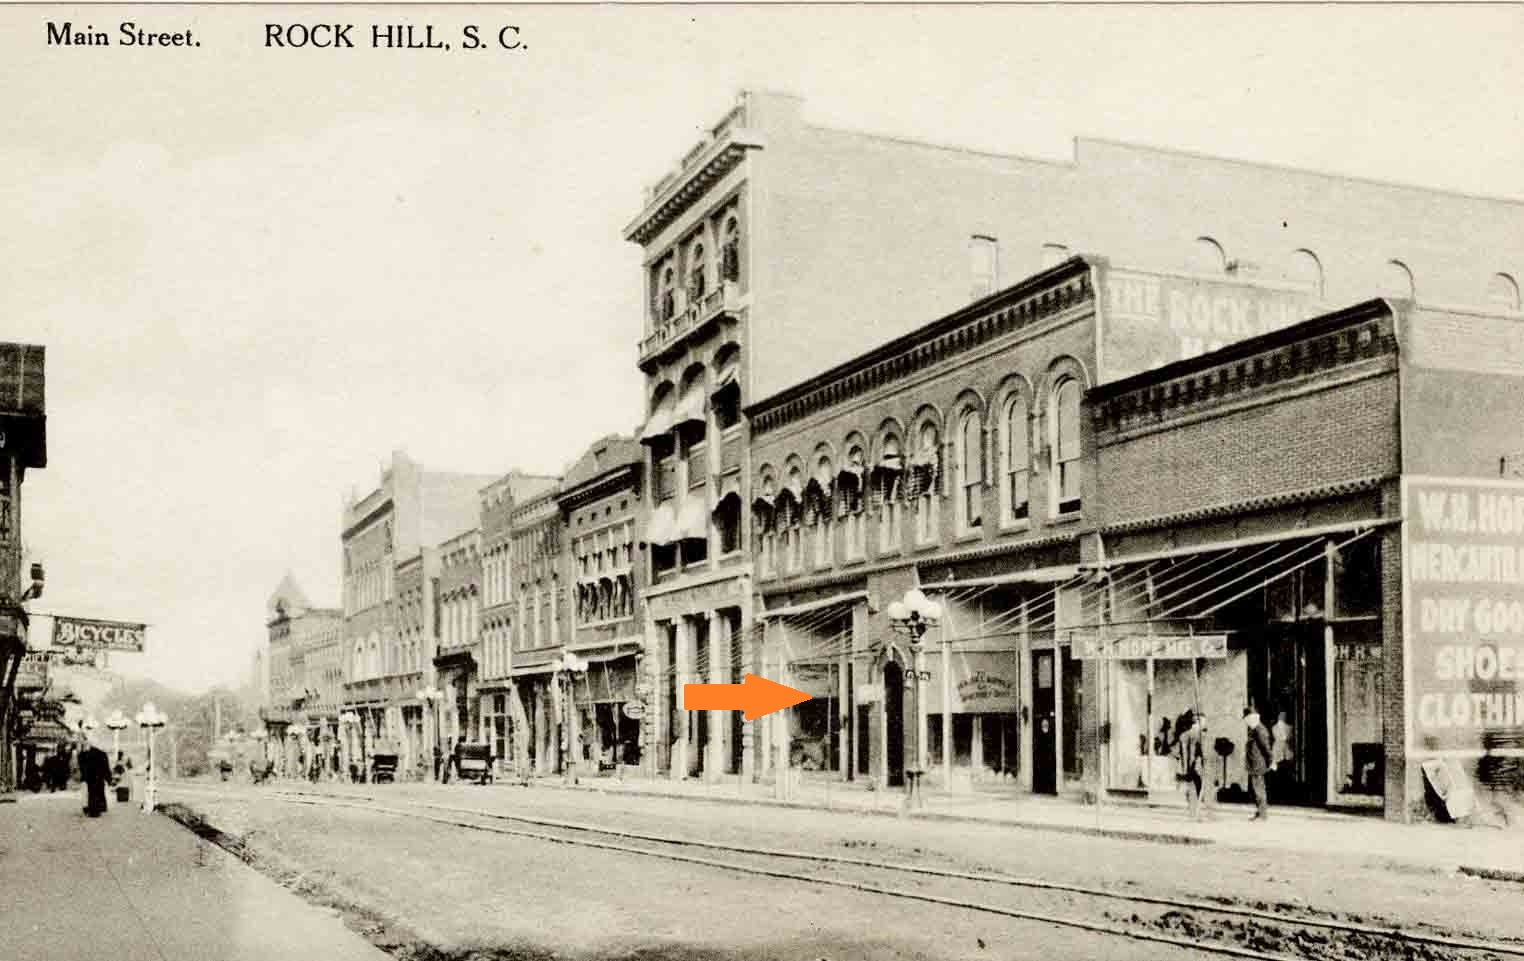 Arrow showing the location of the RH Supply Co., courtesy of the Allen Postcard Collection - 2012